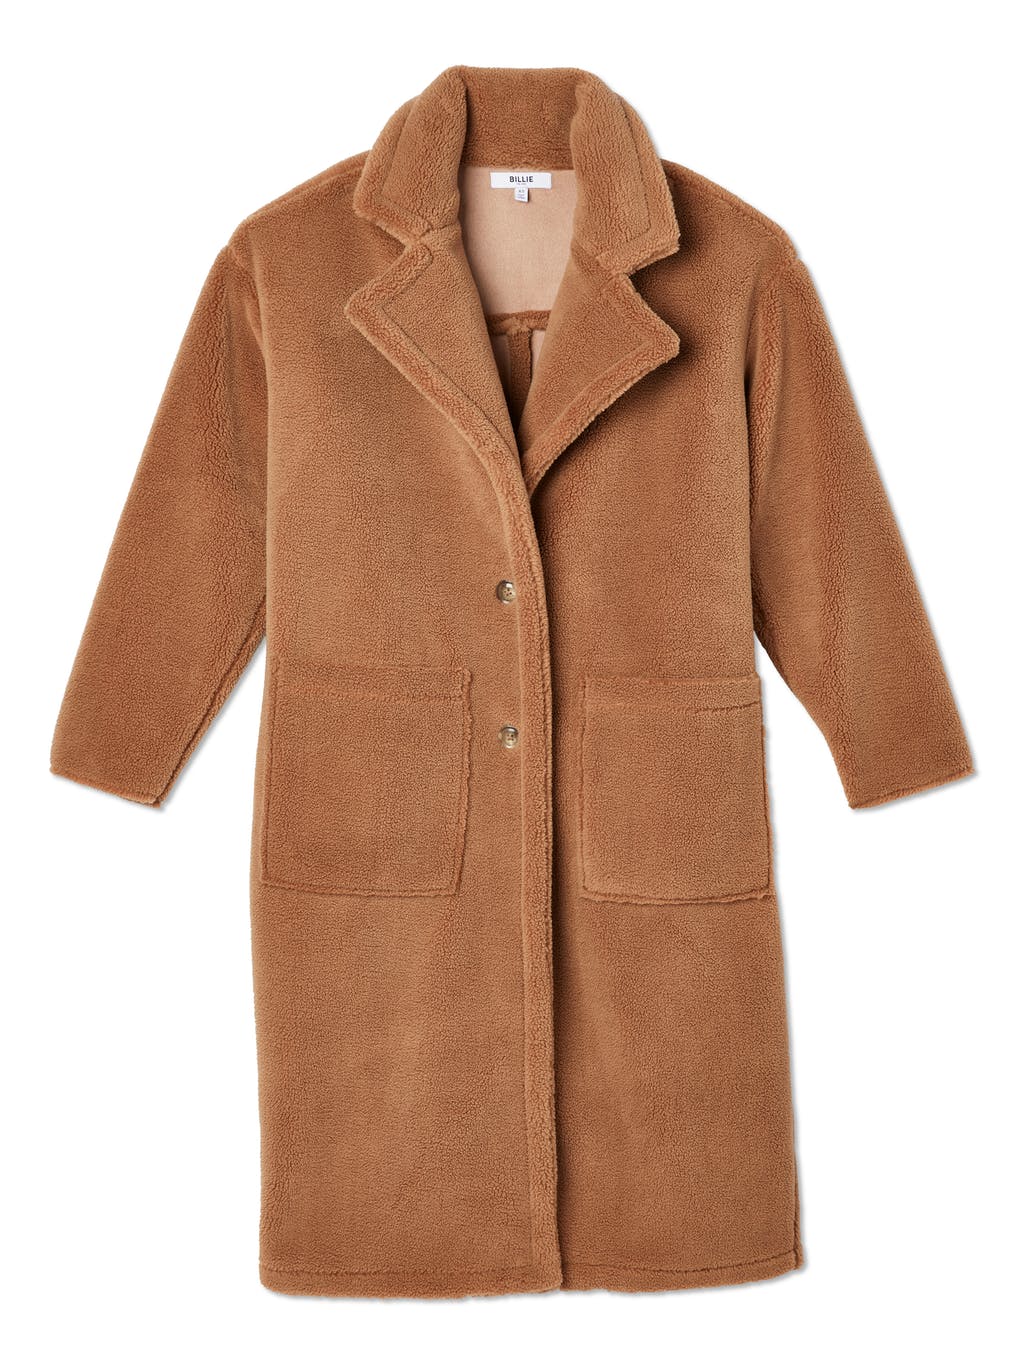 Bronte Faux Shearling Trench Coat